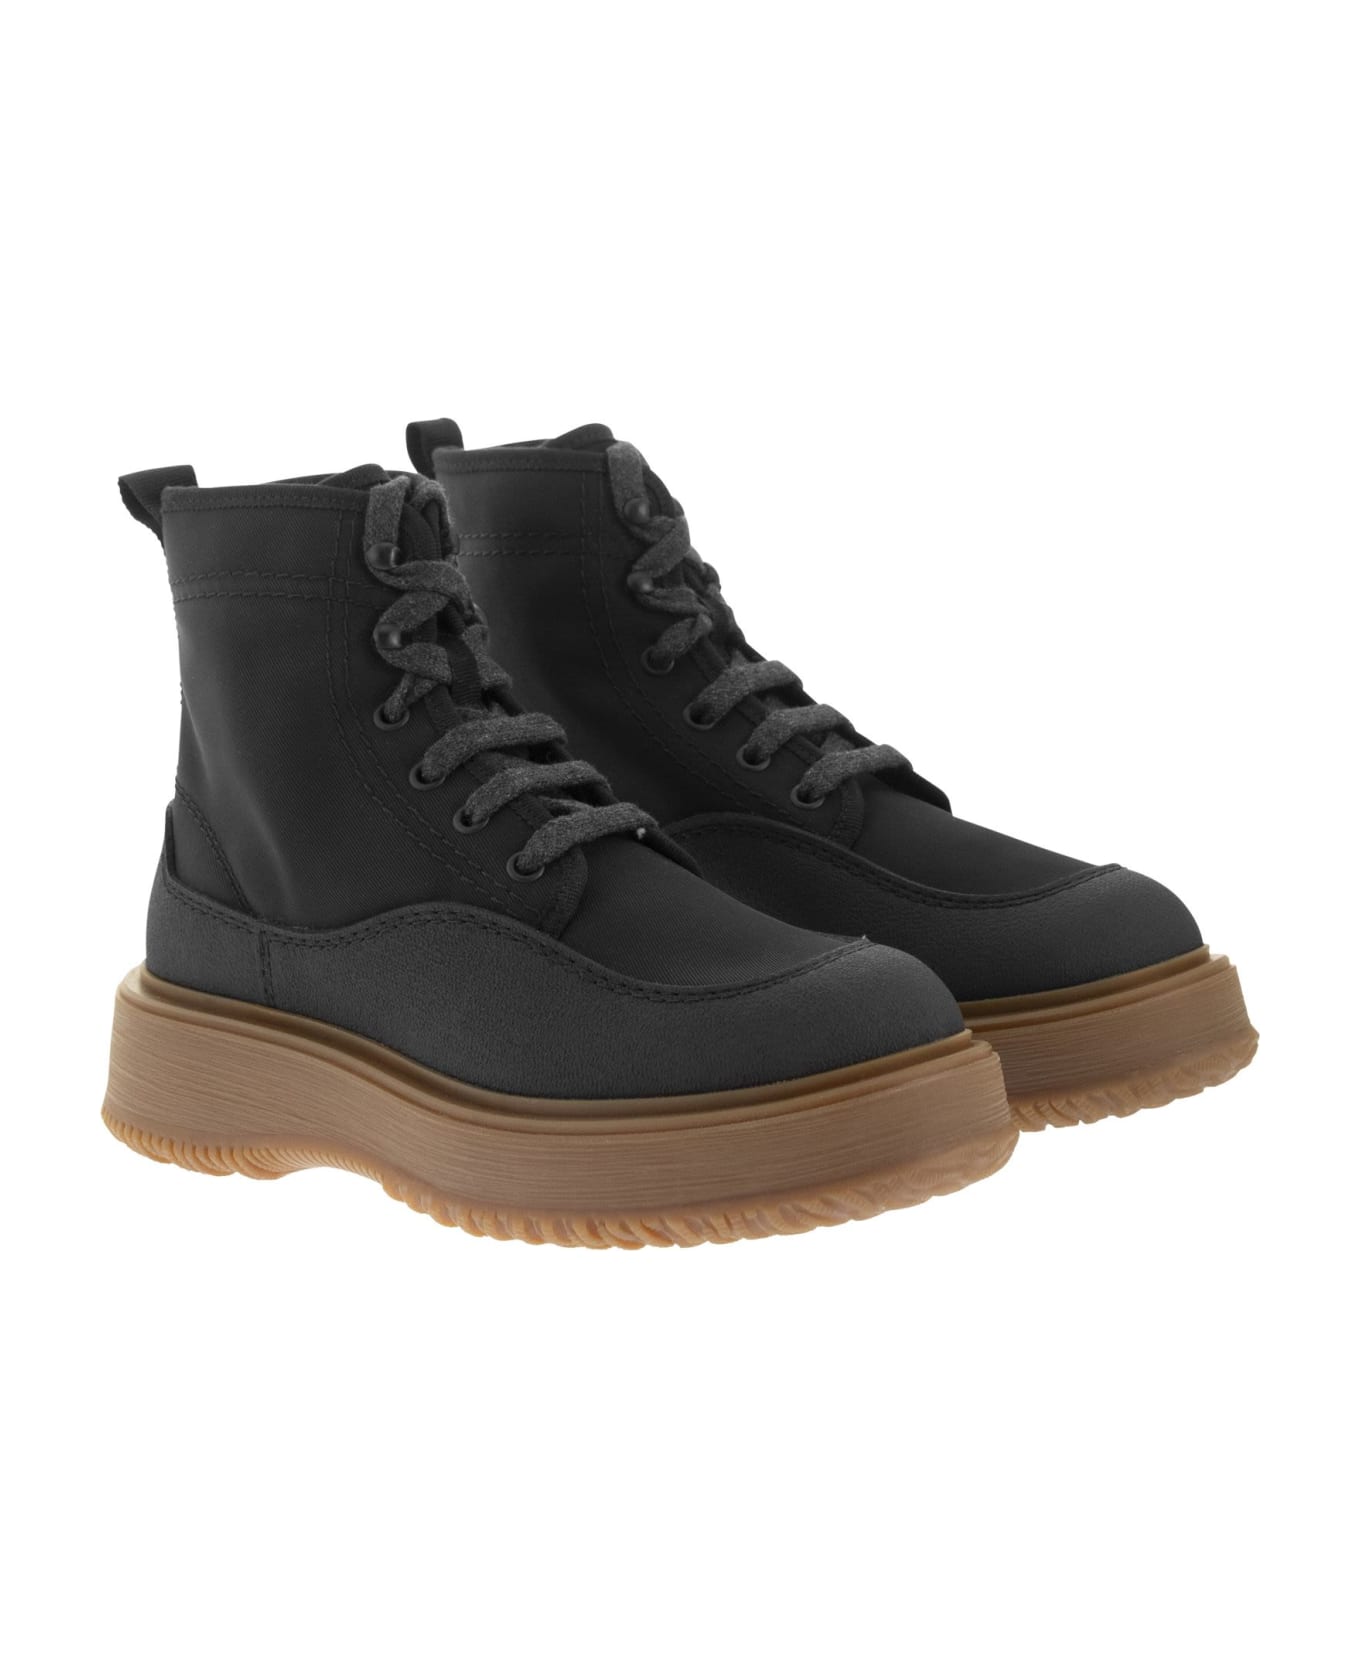 Hogan Untraditional - Laced Boot - Black ブーツ